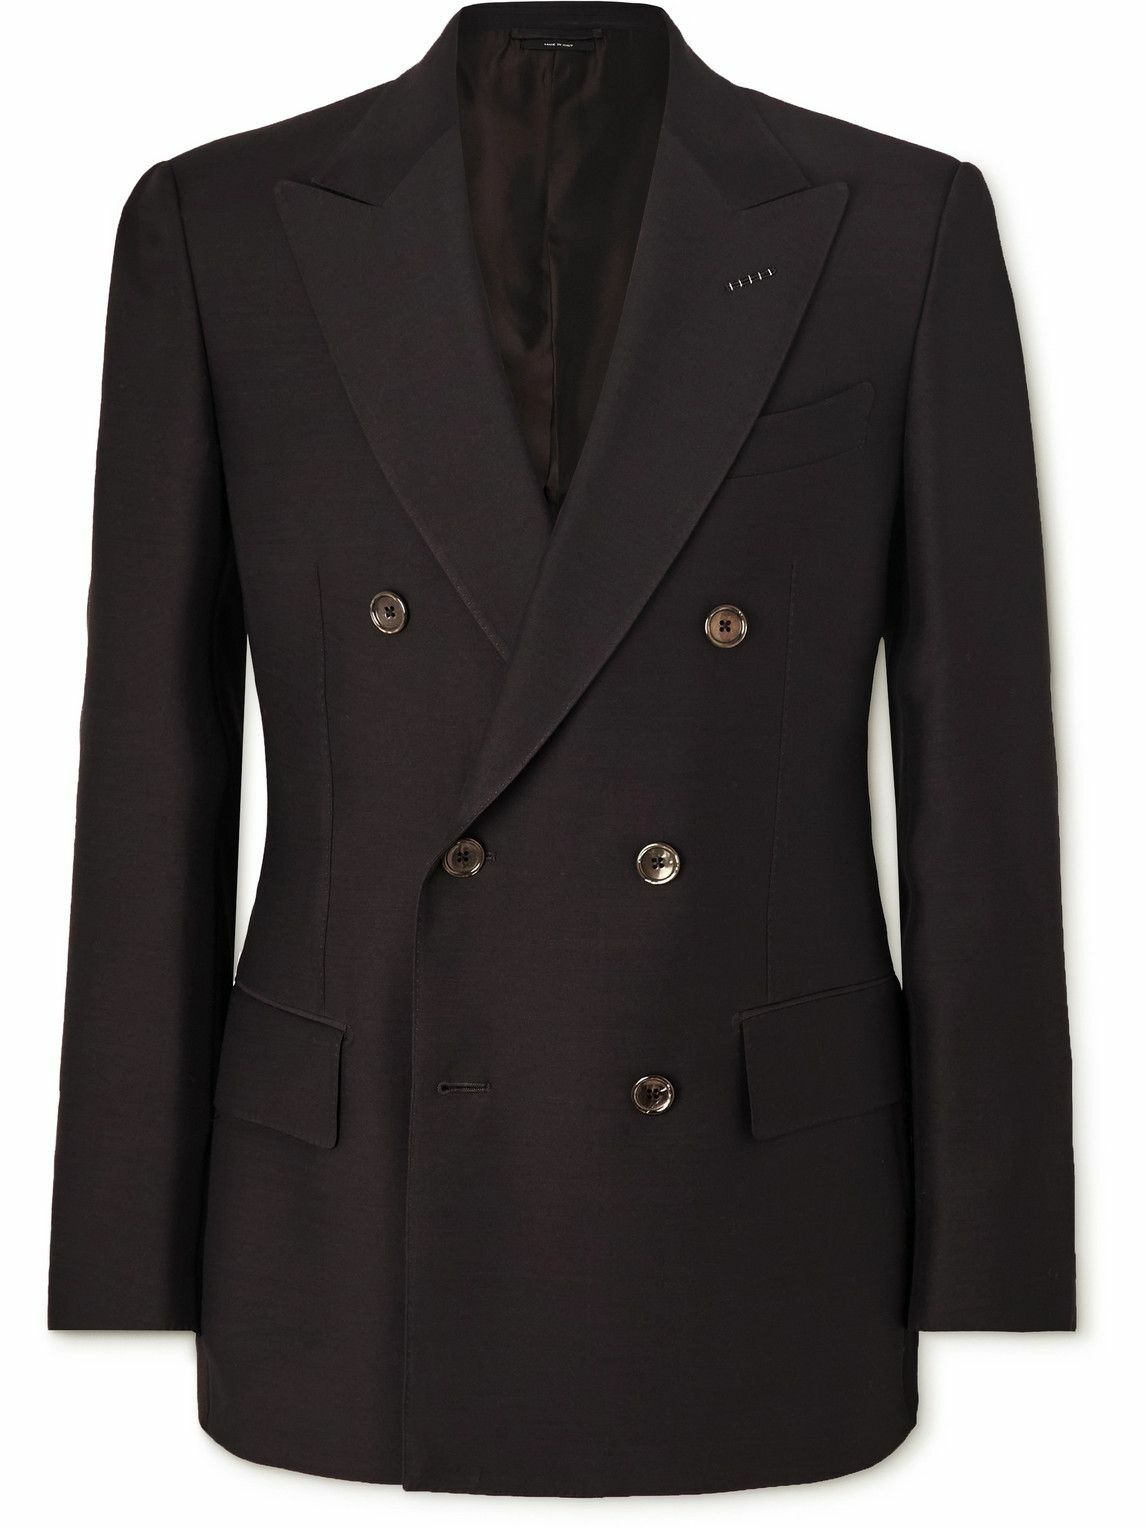 TOM FORD - Double-Breasted Wool and Silk-Blend Suit Jacket - Brown TOM FORD